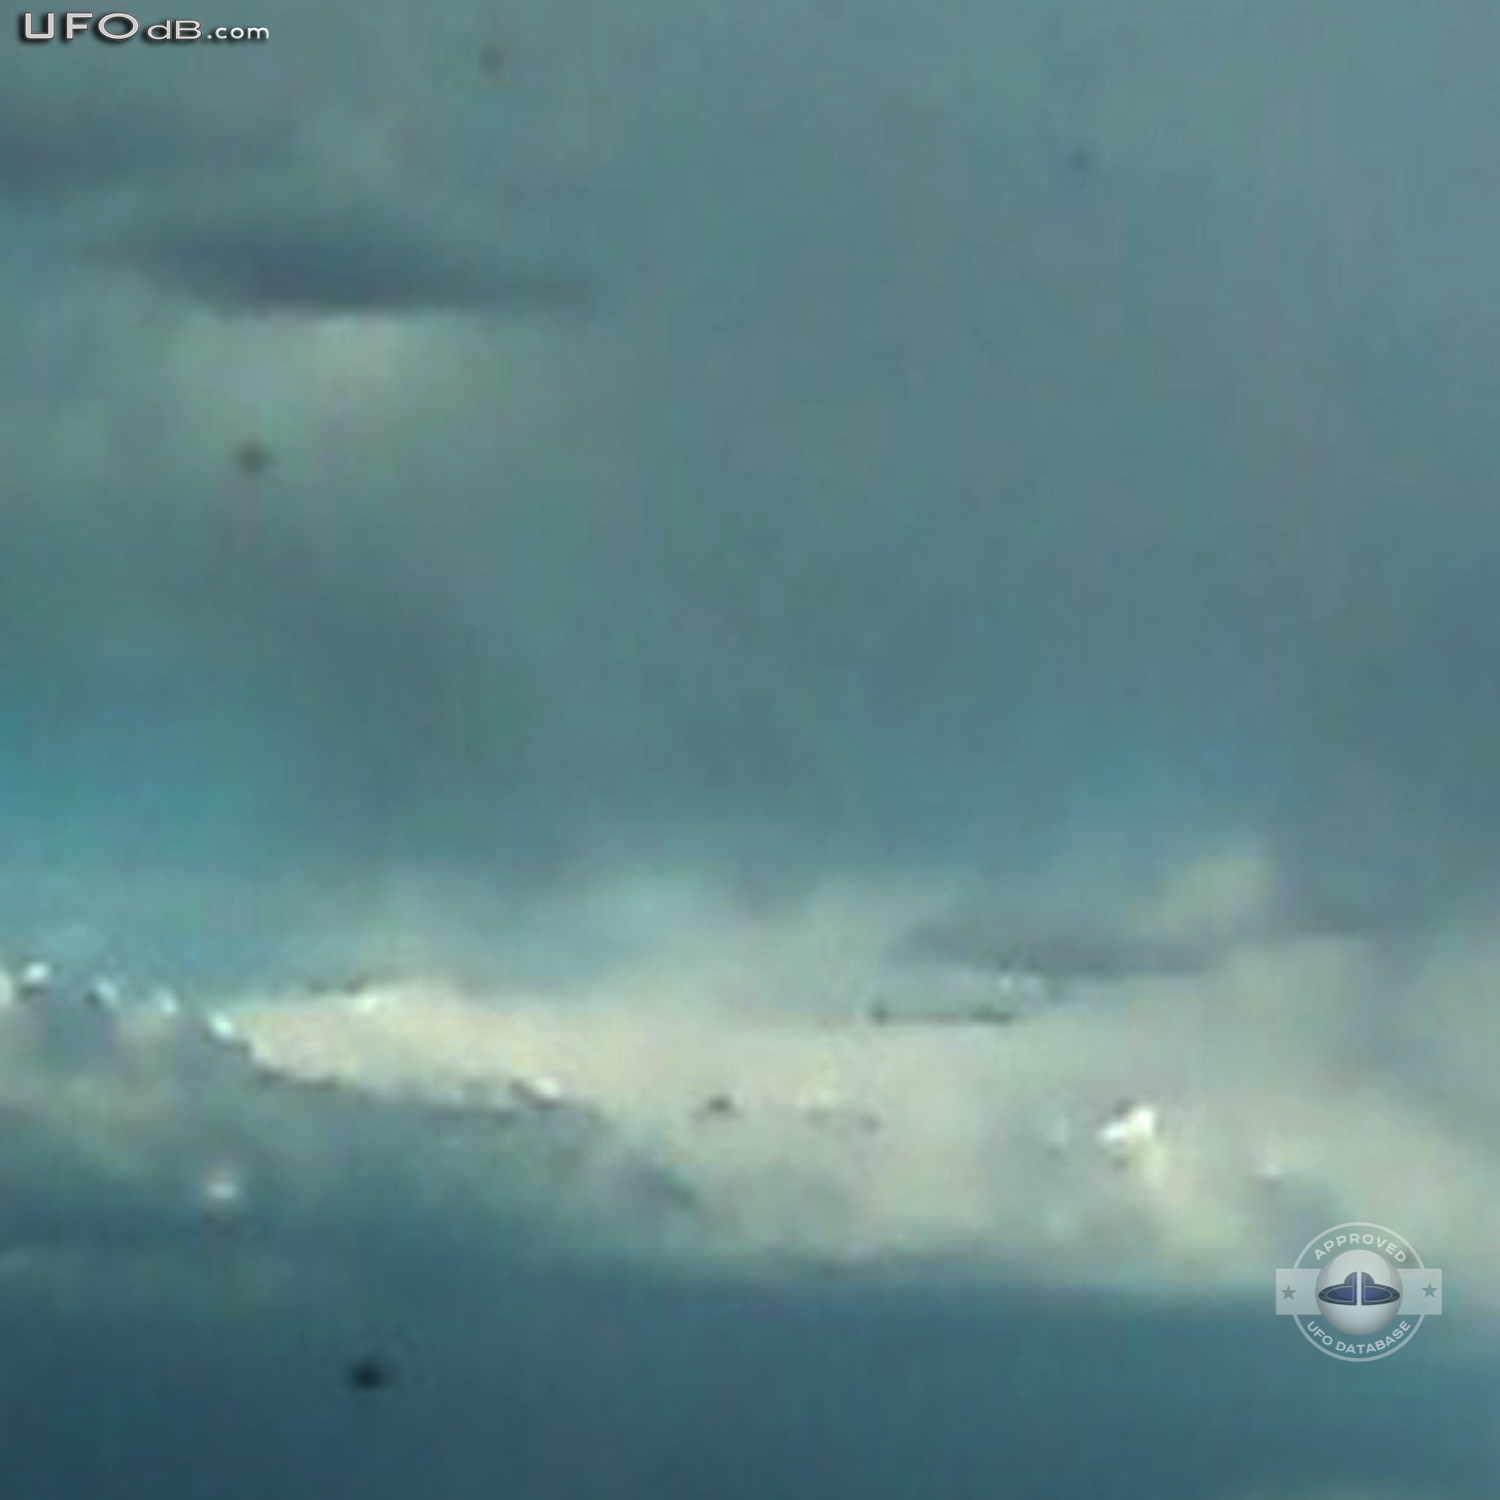 Group of UFOs hiding in the clouds in Cedar City, Utah | May 14 2011 UFO Picture #303-4